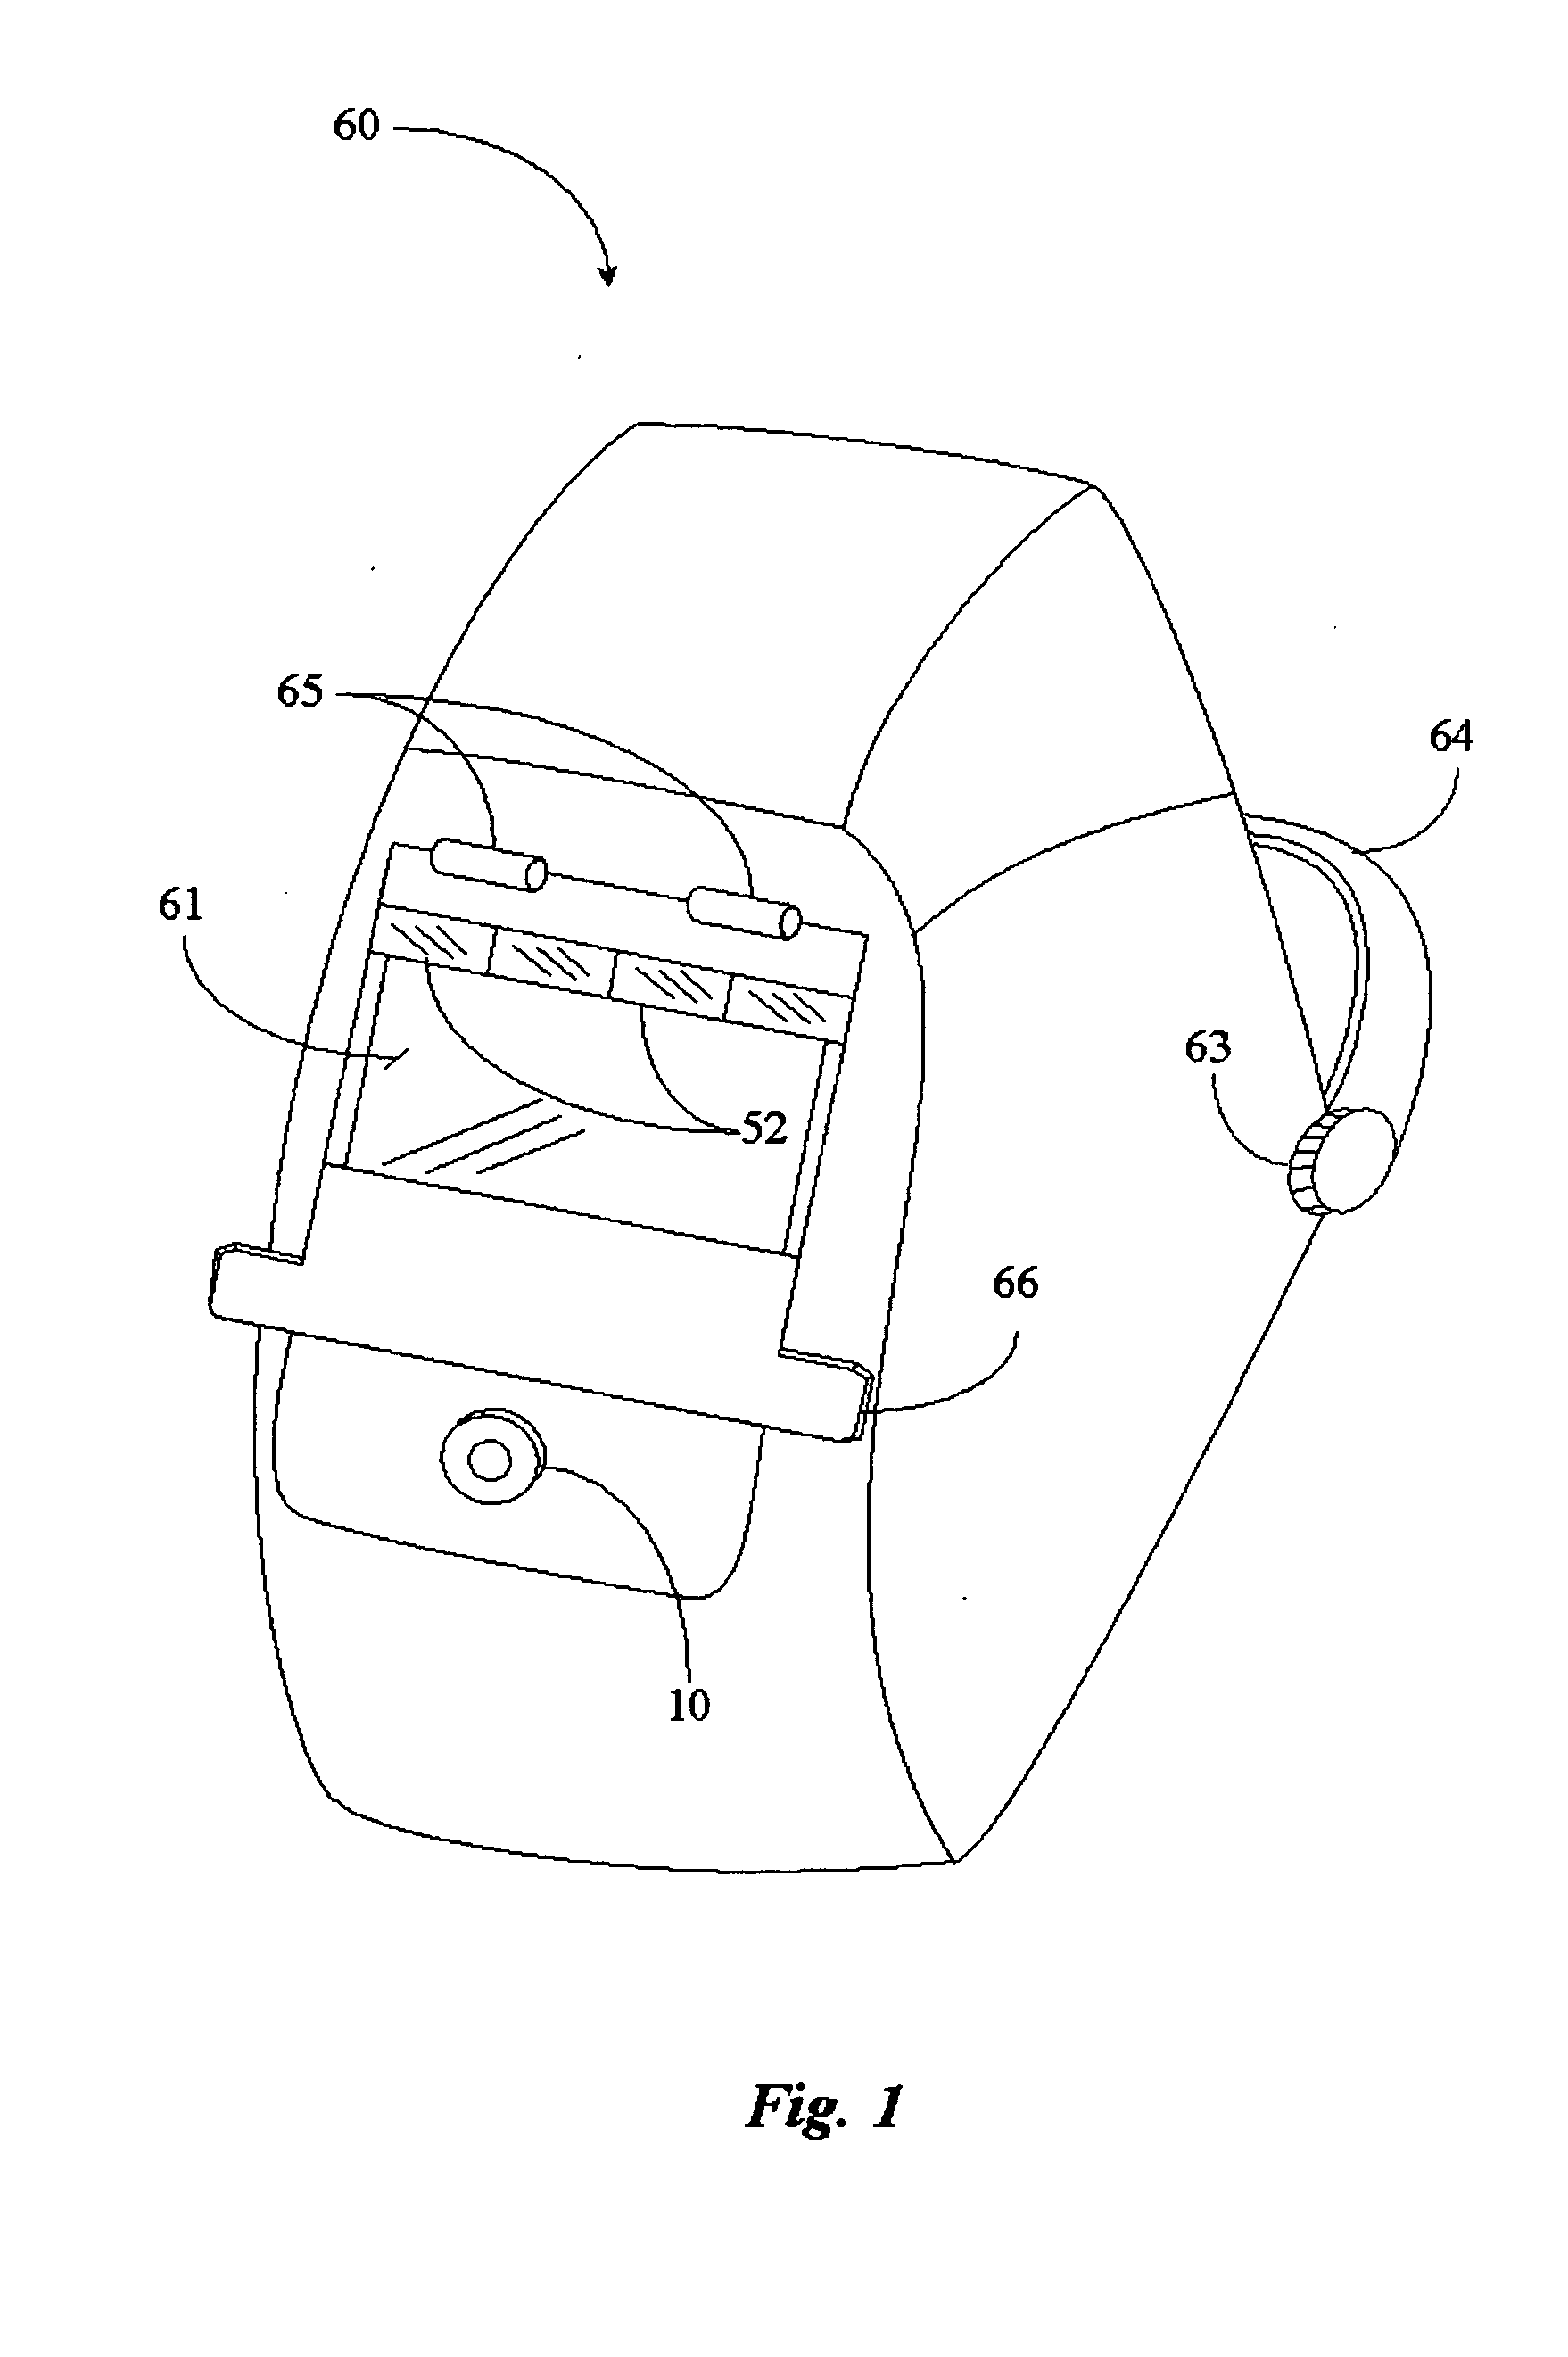 Utility helment with integrated lighting system